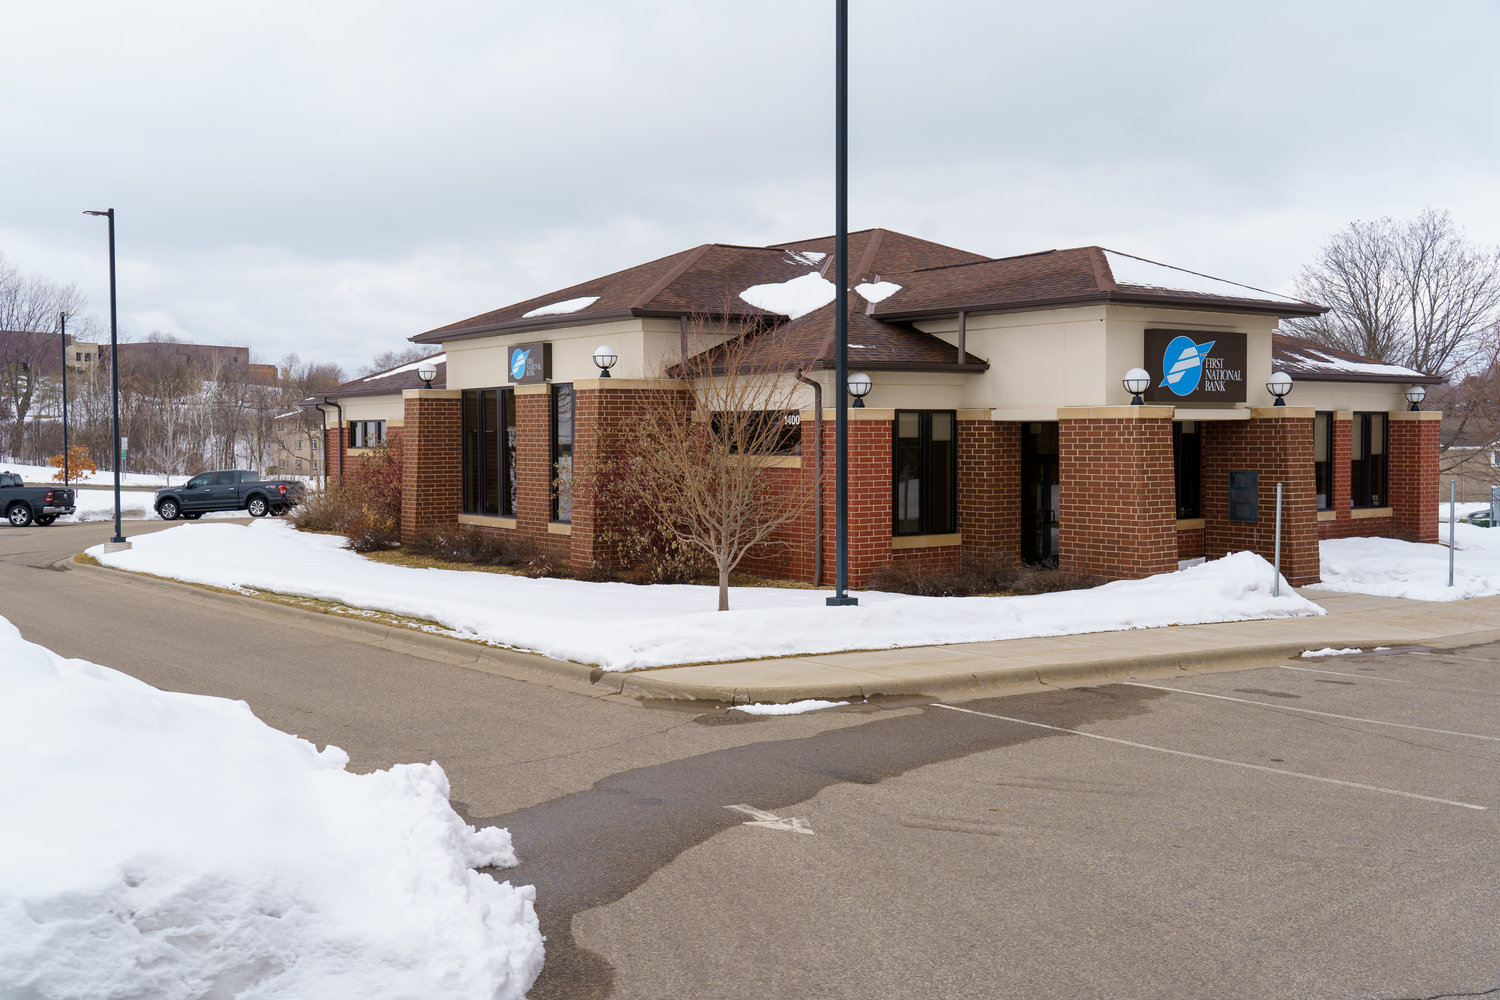 First National Bank of Hastings, located at 1400 North Frontage Road, was robbed the afternoon of March 9th. The suspect was caught within two hours of the initial report to Hastings Police Department.